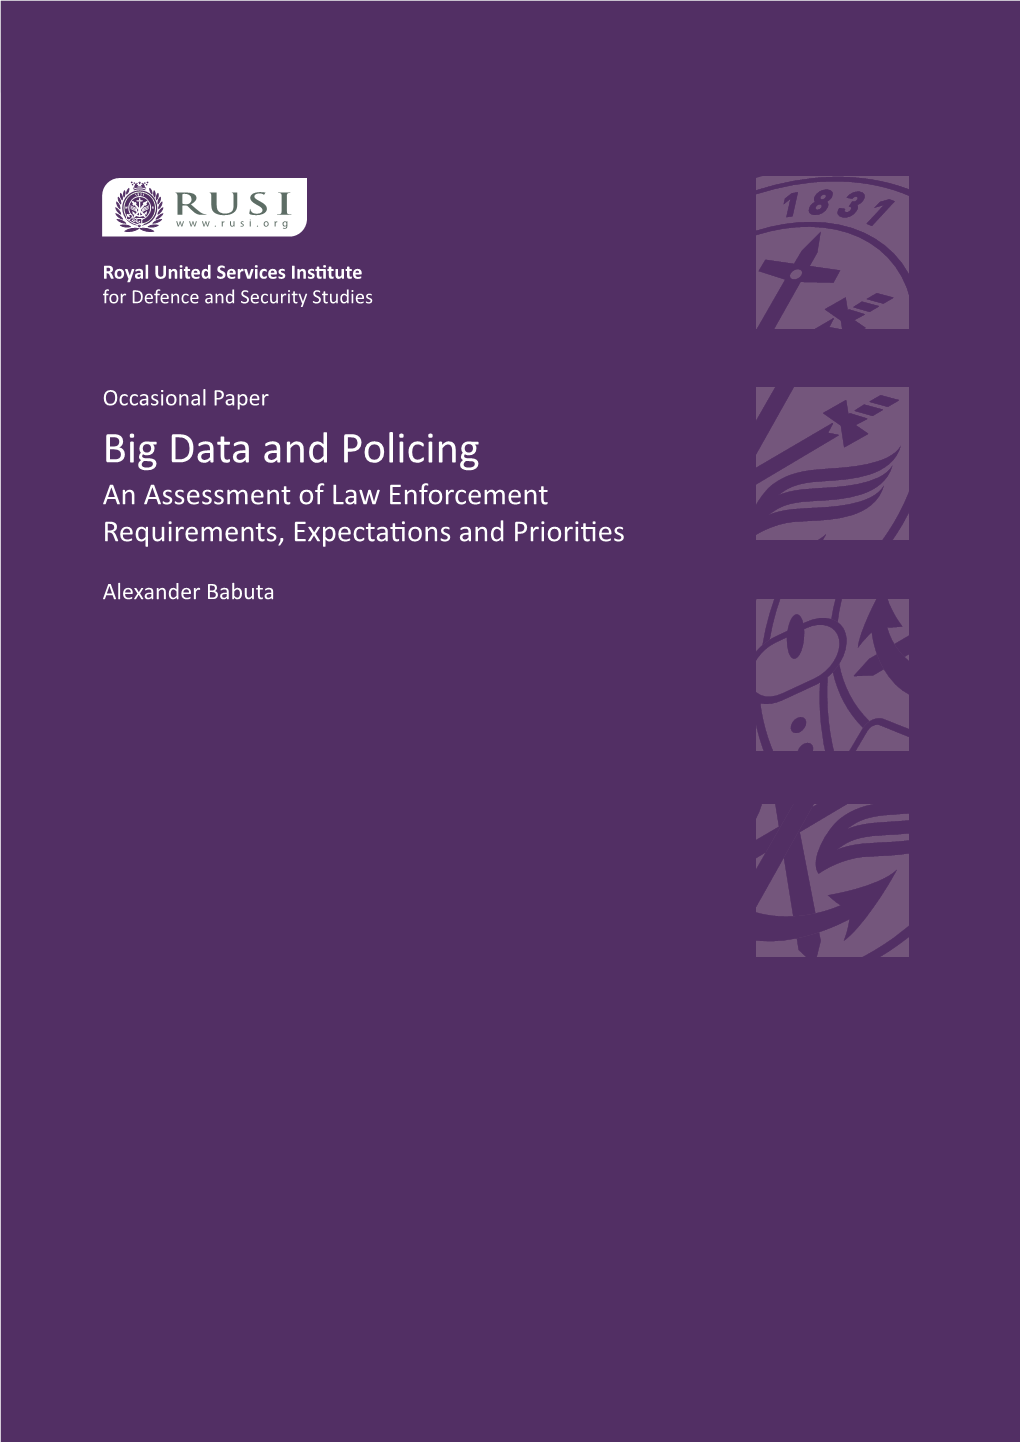 Big Data and Policing an Assessment of Law Enforcement Requirements, Expectations and Priorities